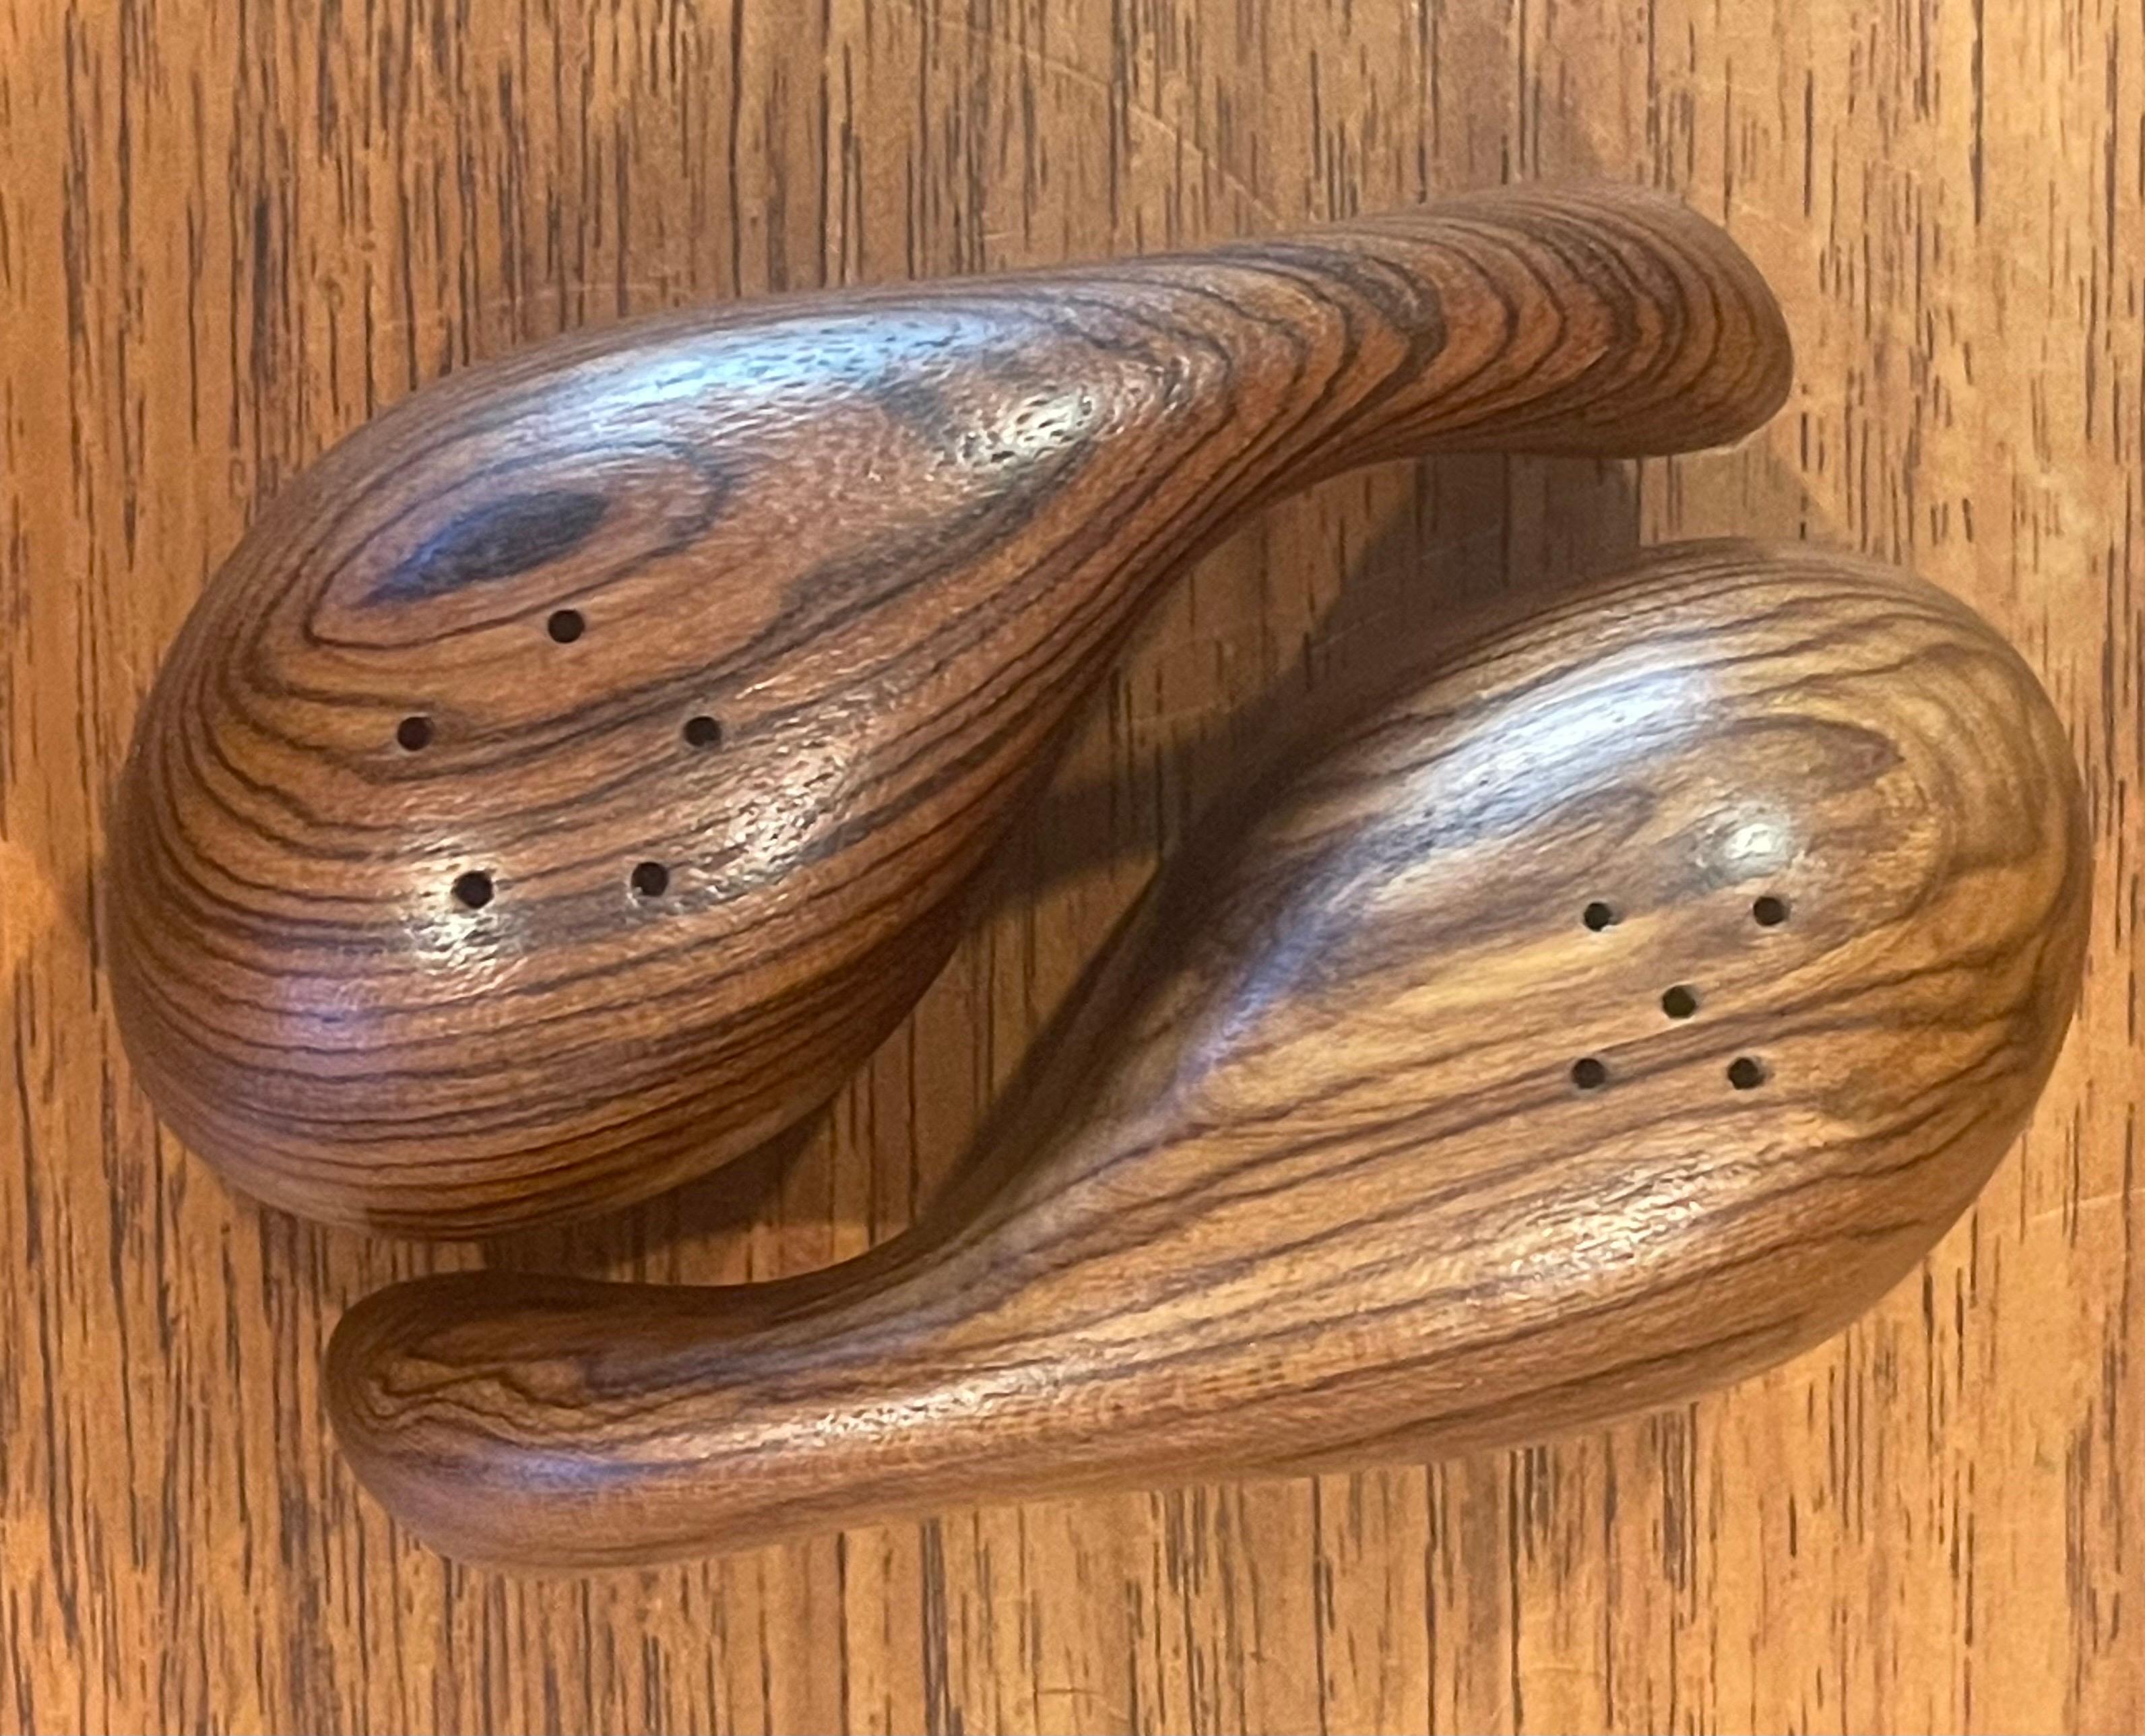 Pair of MCM Cocobolo Wood Minimalist Salt & Pepper Shakers by Don Shoemaker For Sale 4